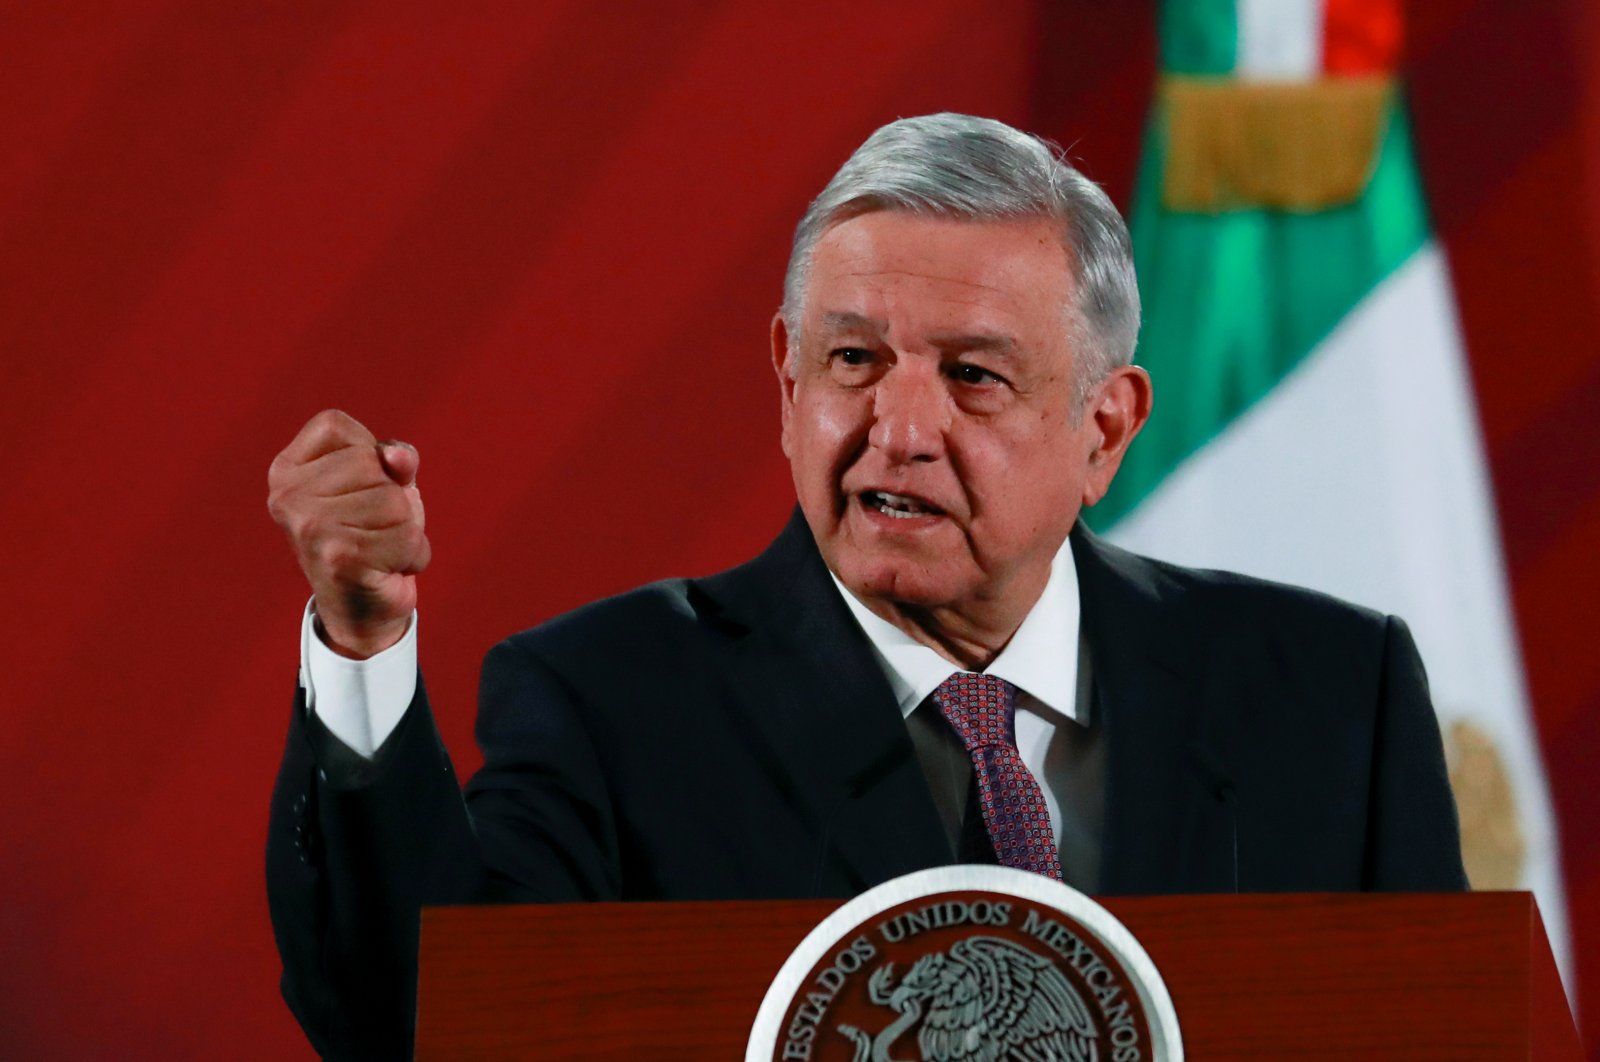 Mexico's President Andres Manuel Lopez Obrador speaks during a news conference at the National Palace in Mexico City, Mexico, March 9, 2020. (Reuters Photo)